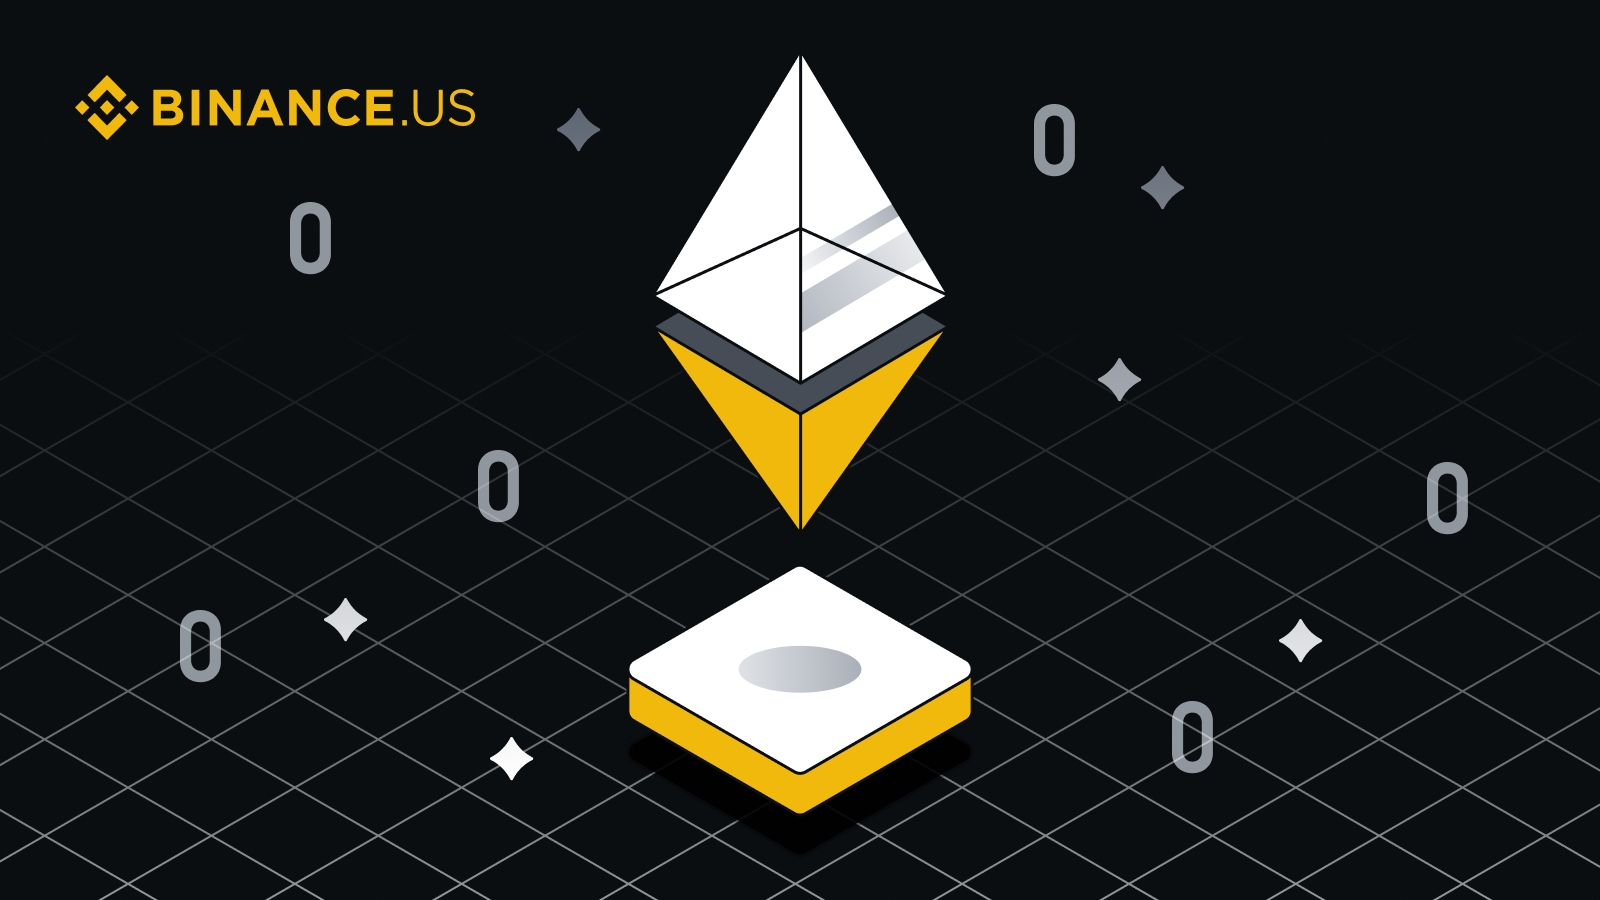 Binance.US Expands Zero Fee Trading to Ethereum (ETH) Through Updated Fee Schedule